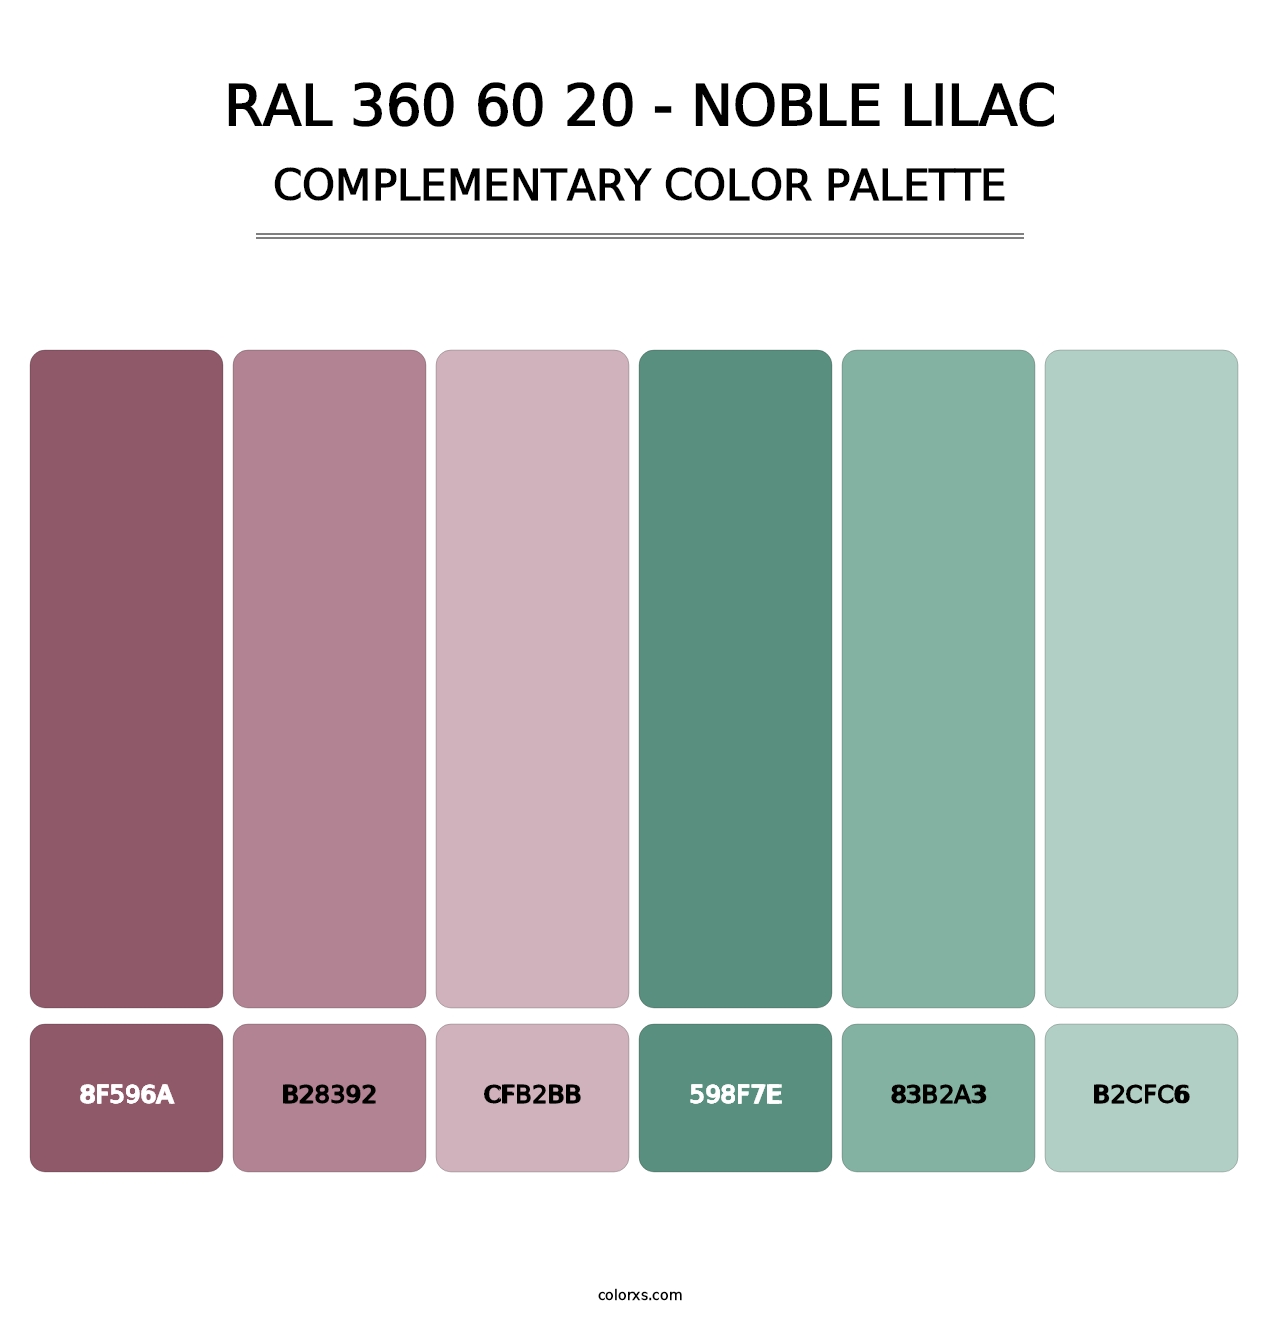 RAL 360 60 20 - Noble Lilac - Complementary Color Palette